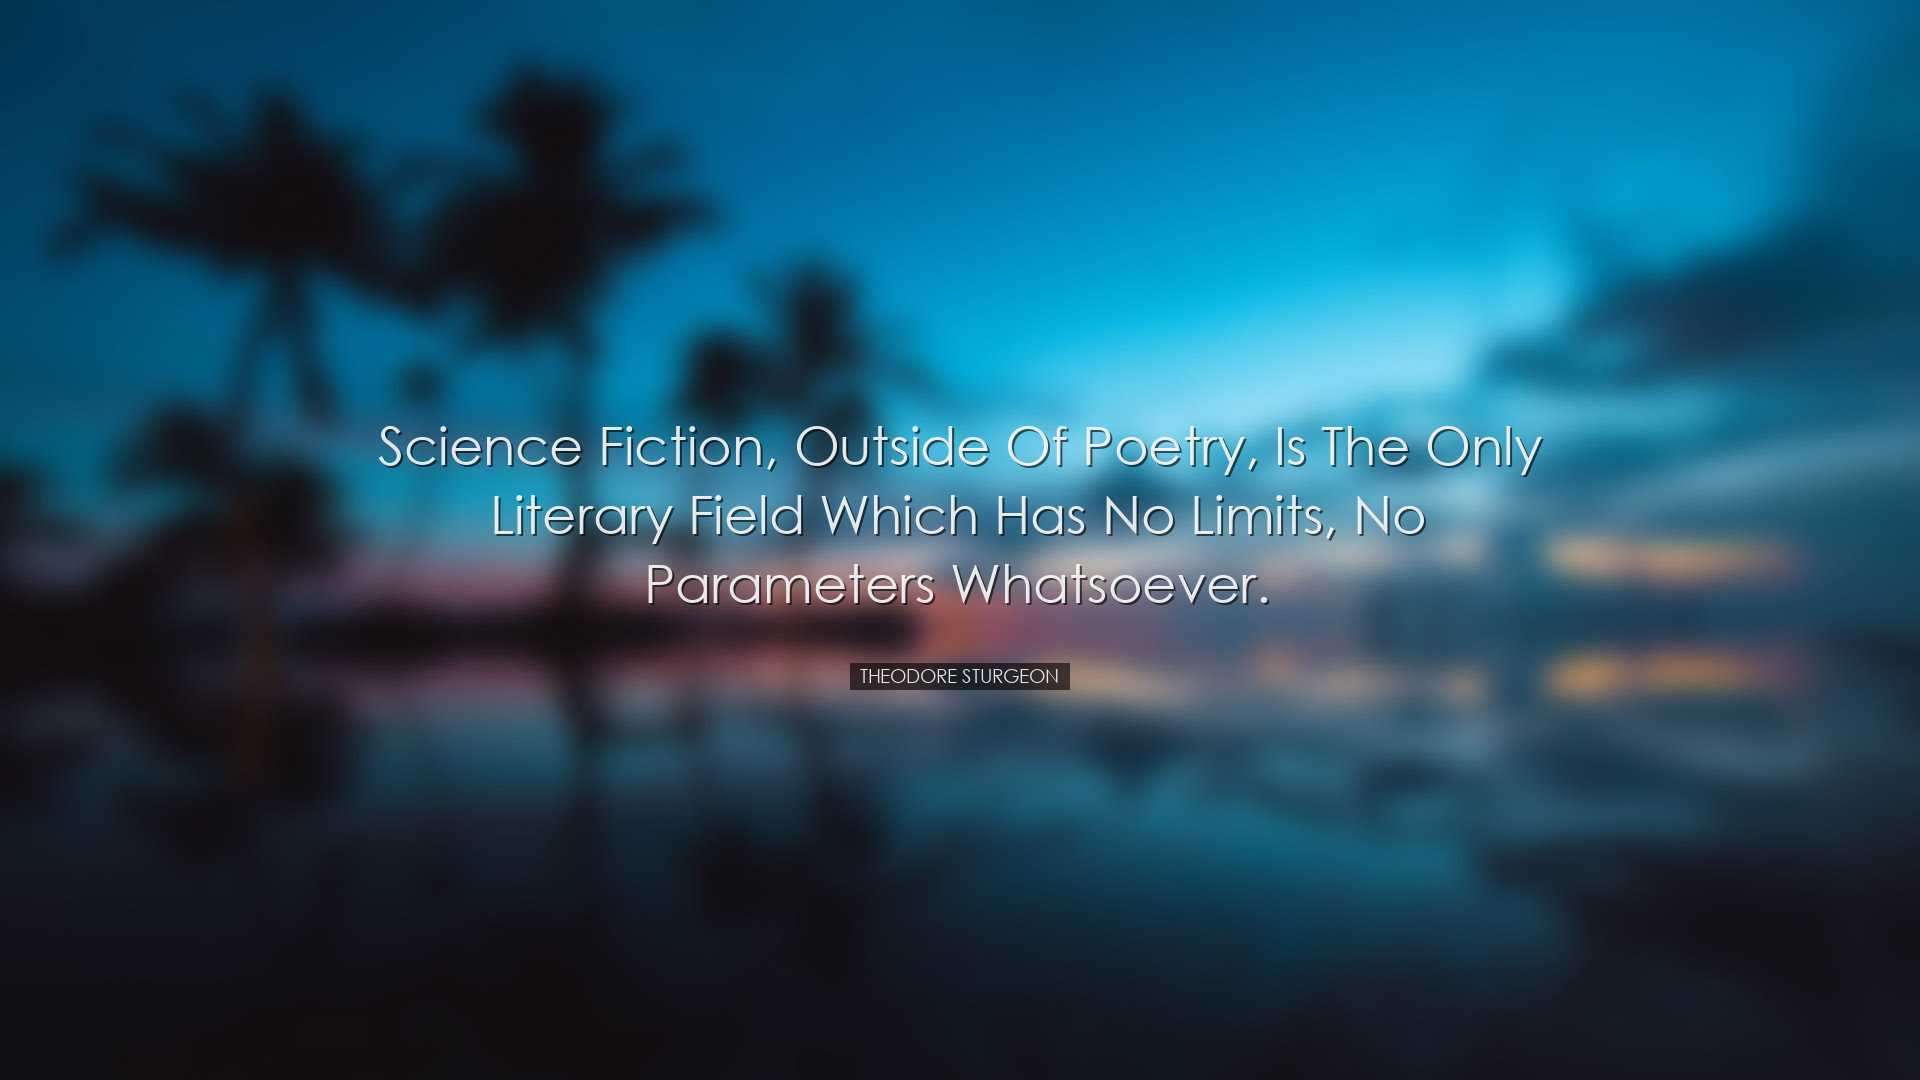 Science fiction, outside of poetry, is the only literary field whi